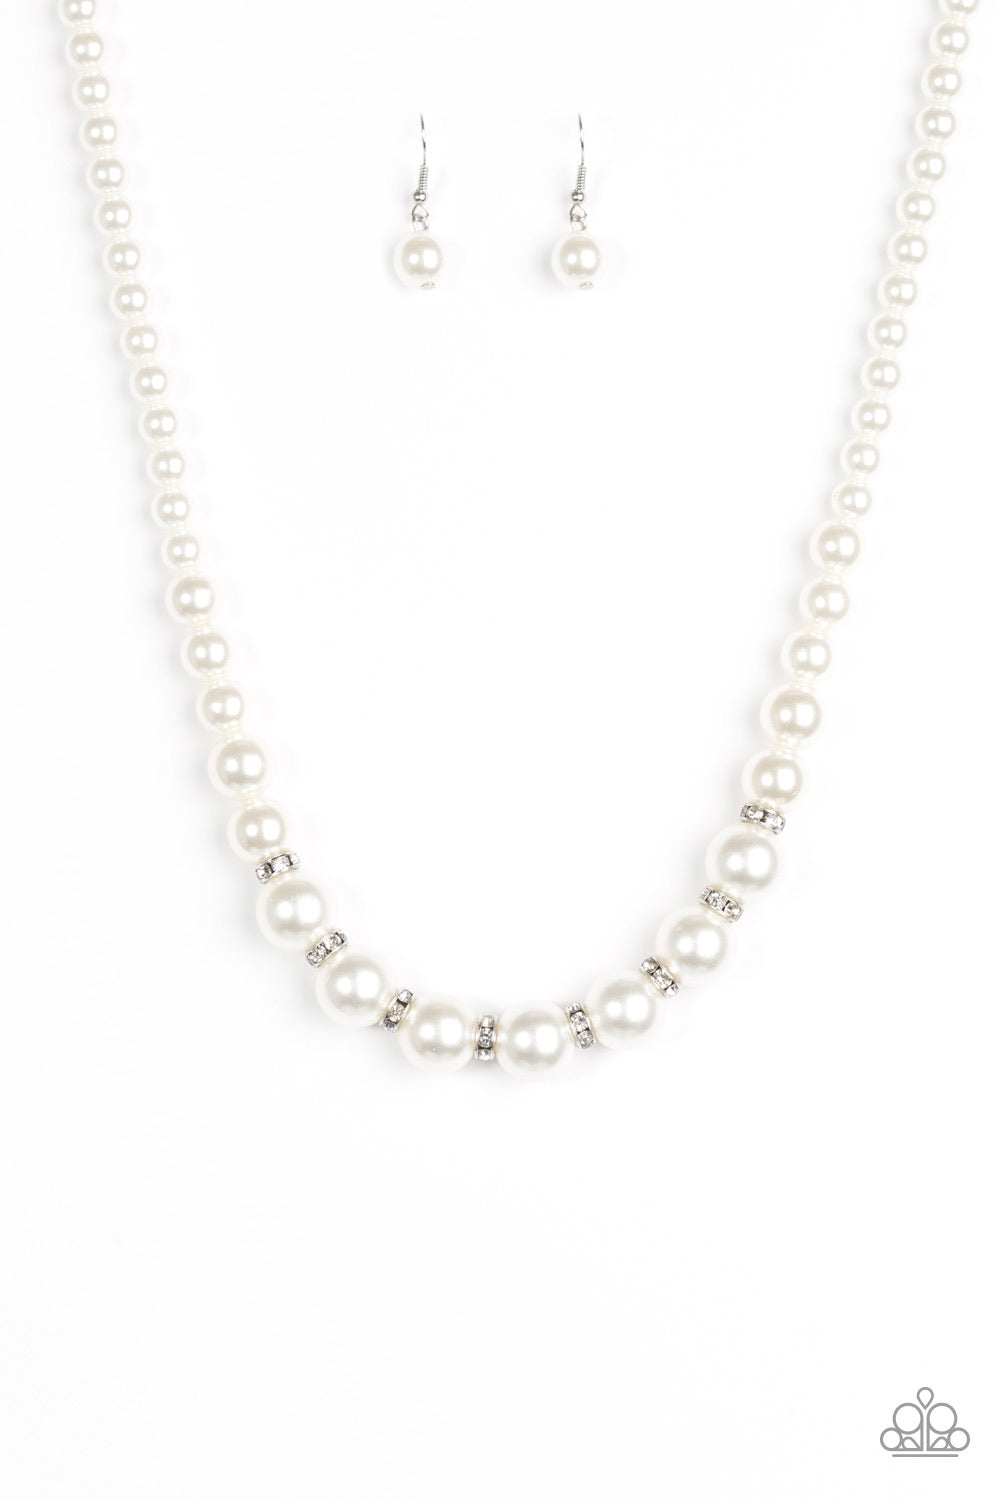 Showtime Shimmer Silver-Necklace